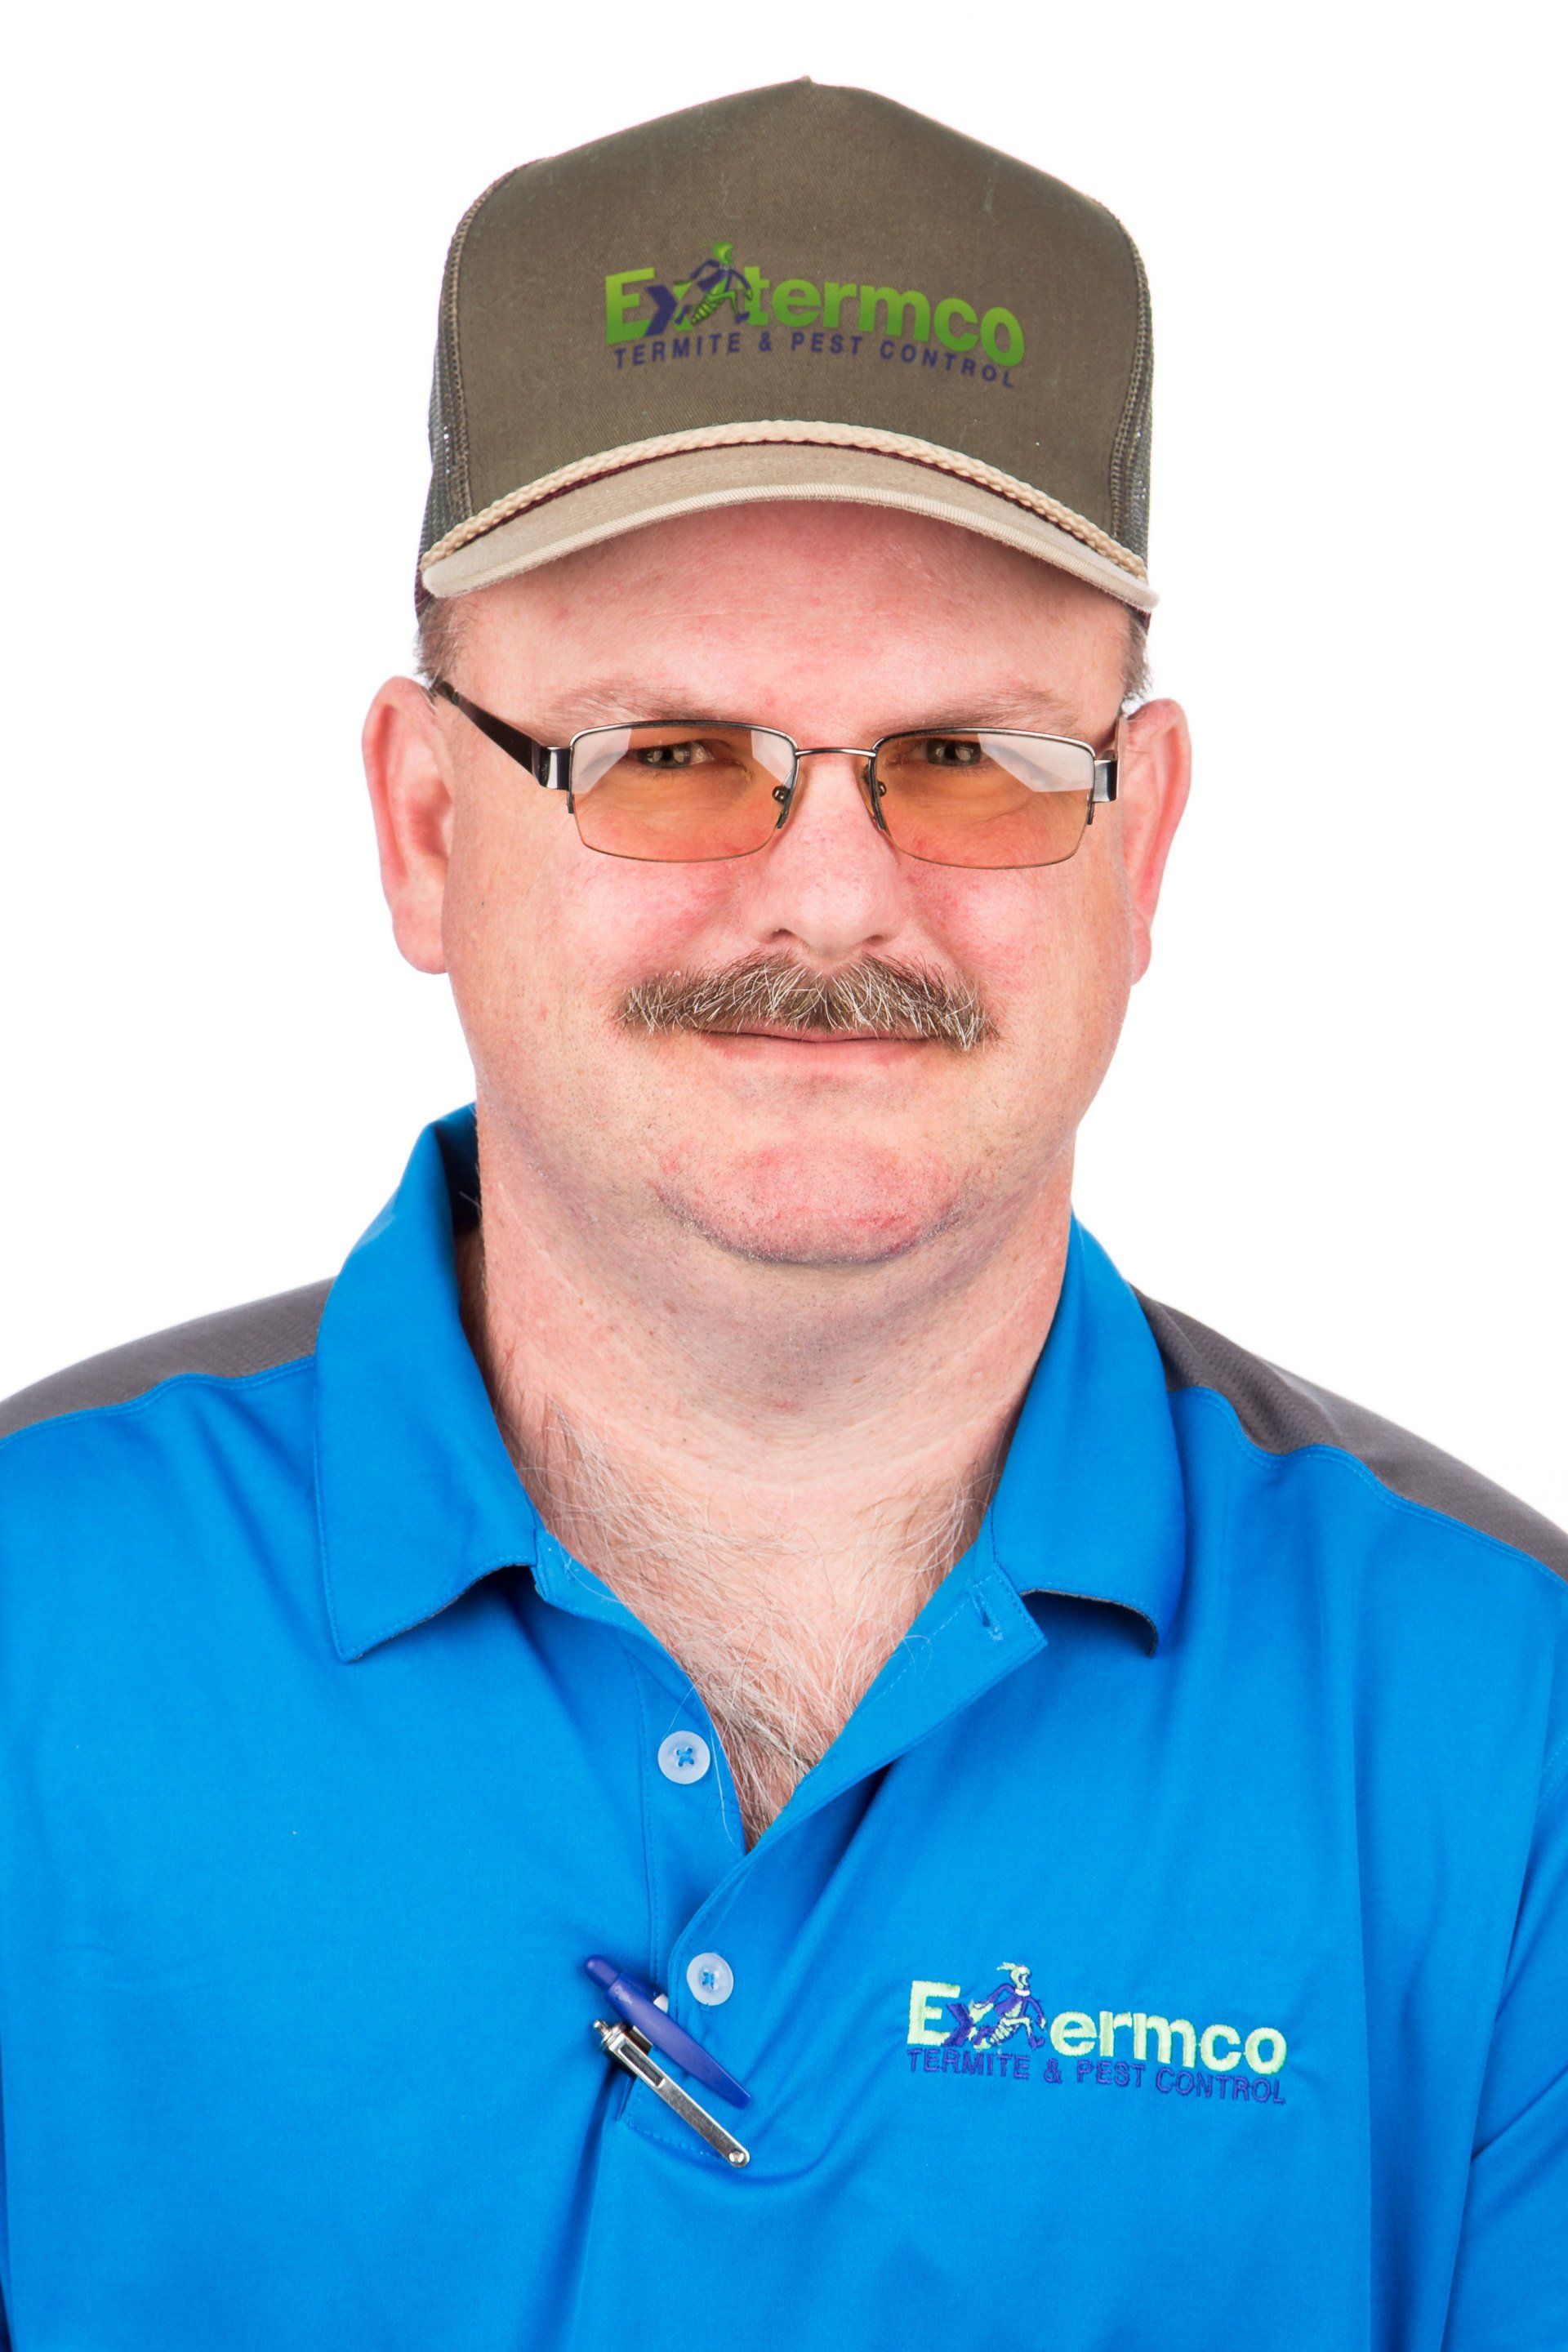 Clayton Quinalty﻿ — Fort Smith, AR — Extermco Termite & Pest Control